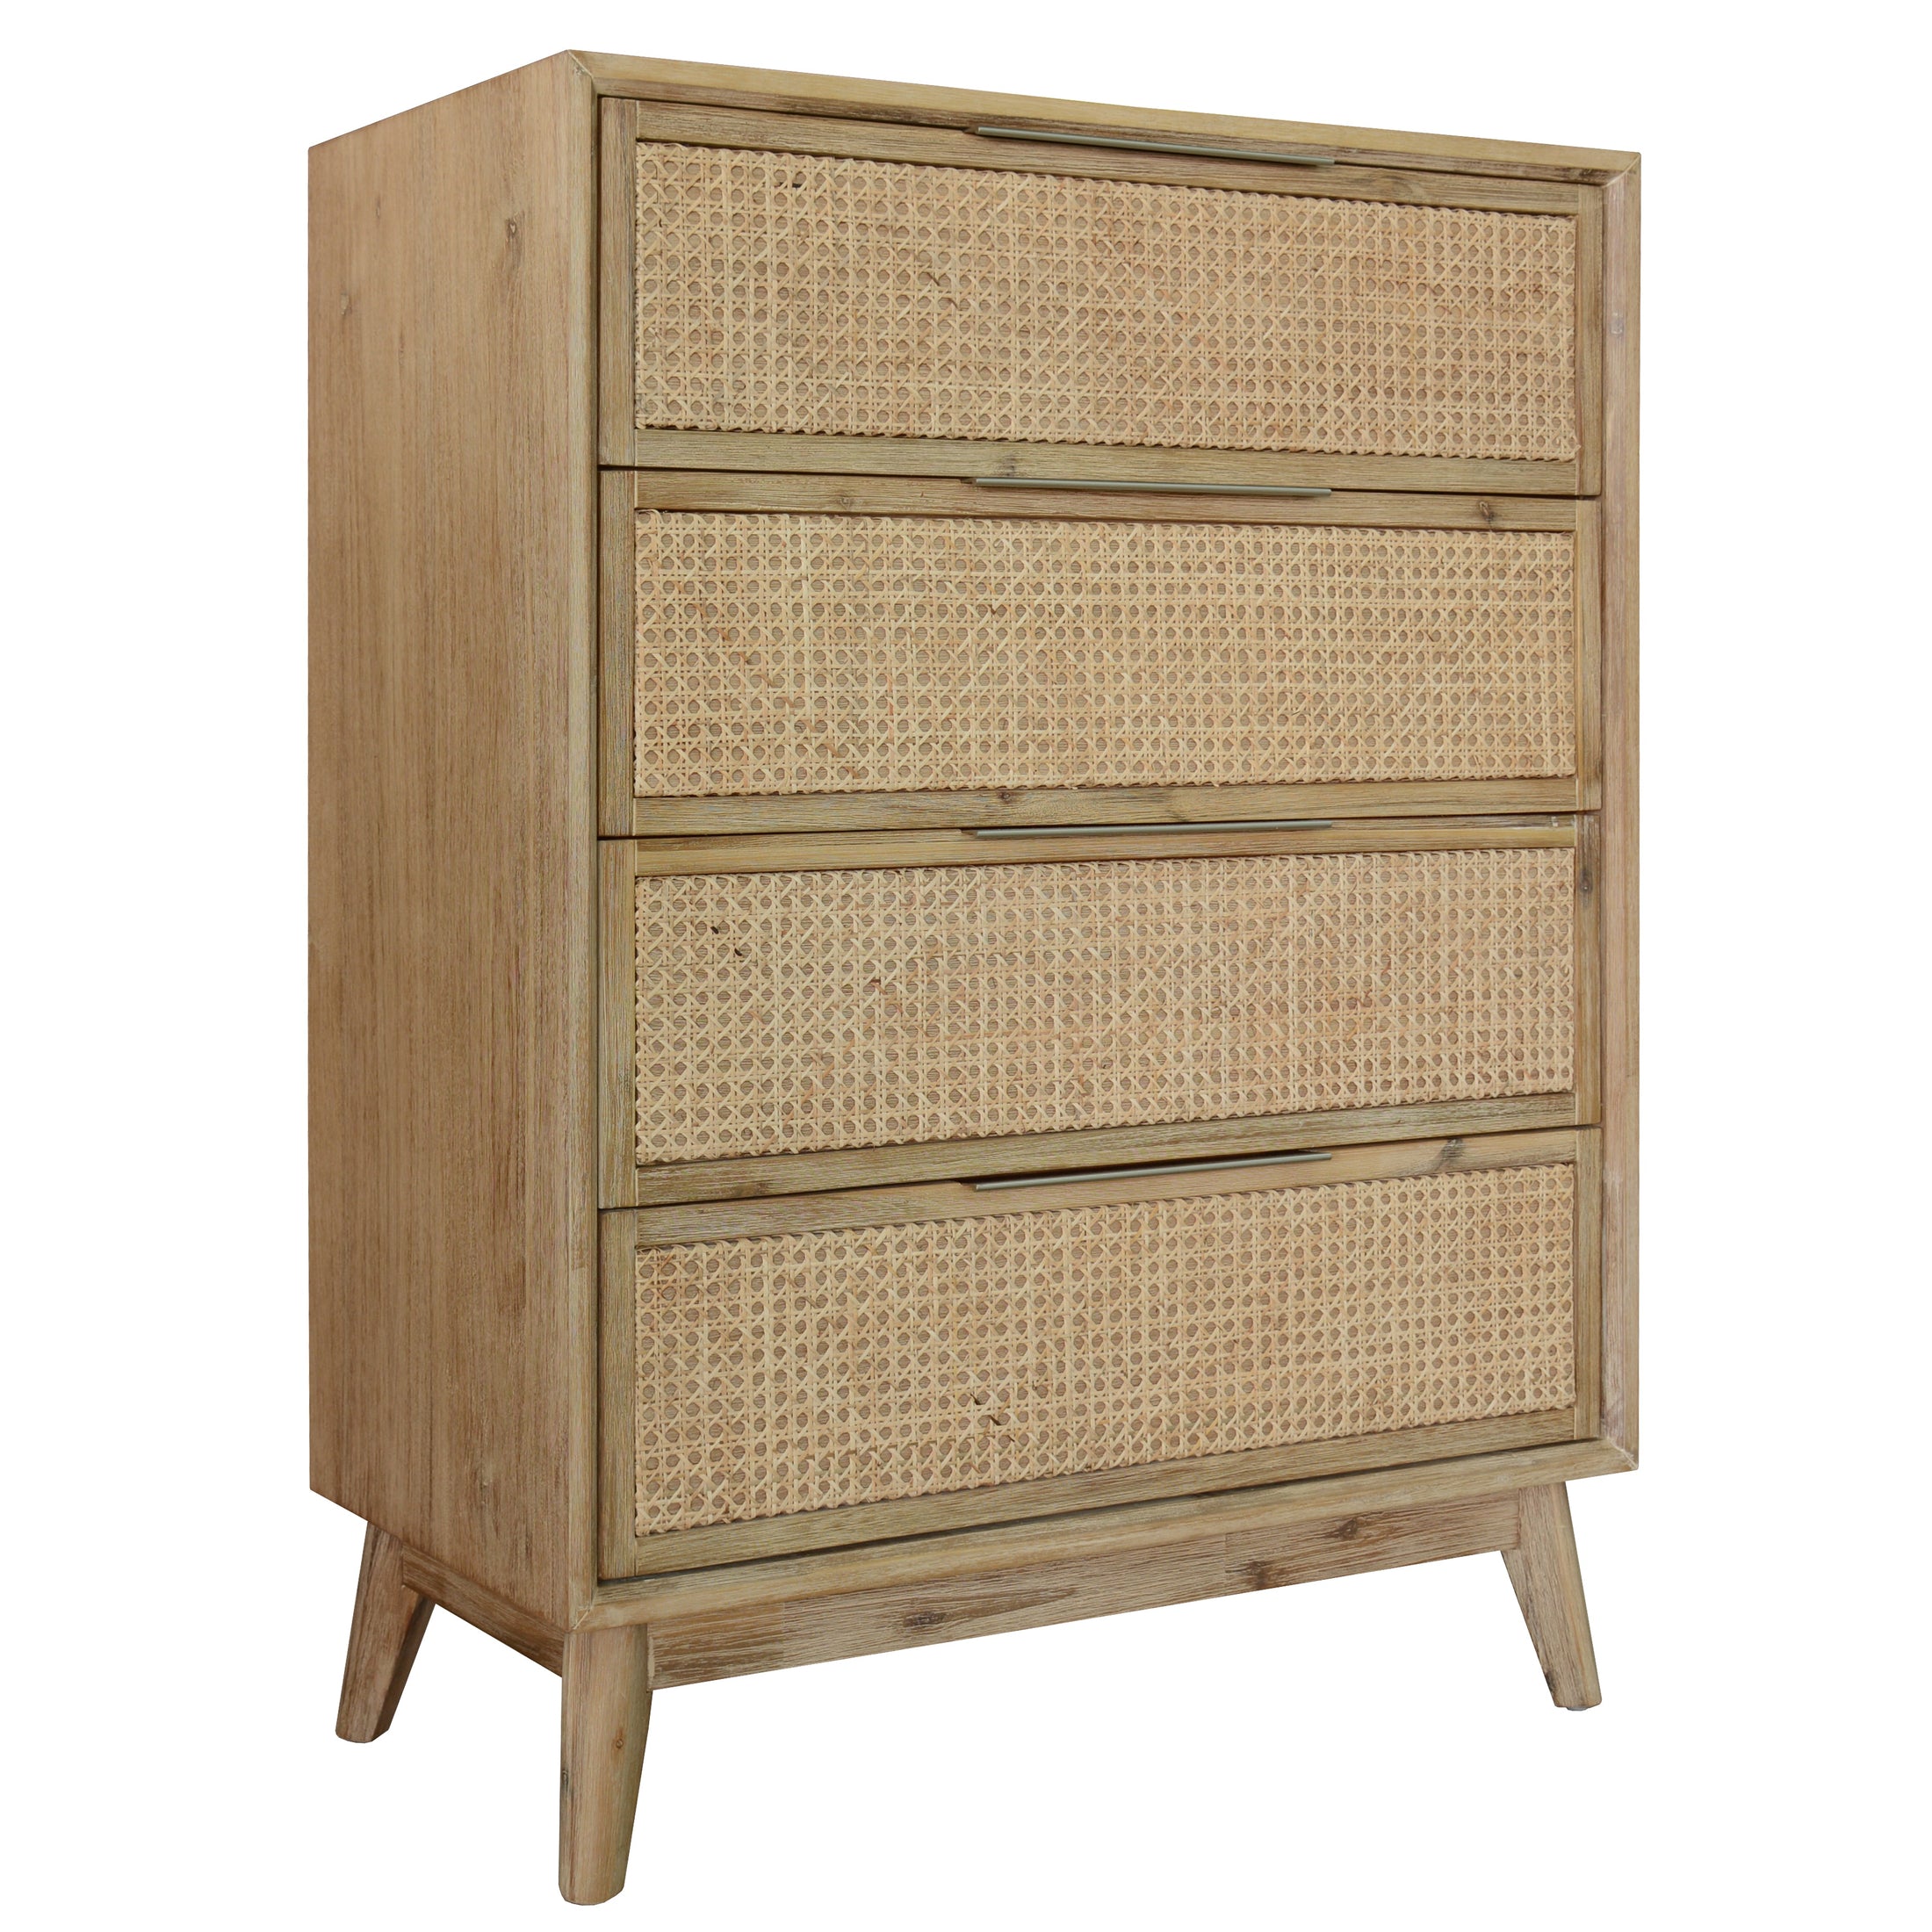 Lola Tallboy 4 Chest of Drawers Solid Acacia Wood Storage Cabinet - Brown